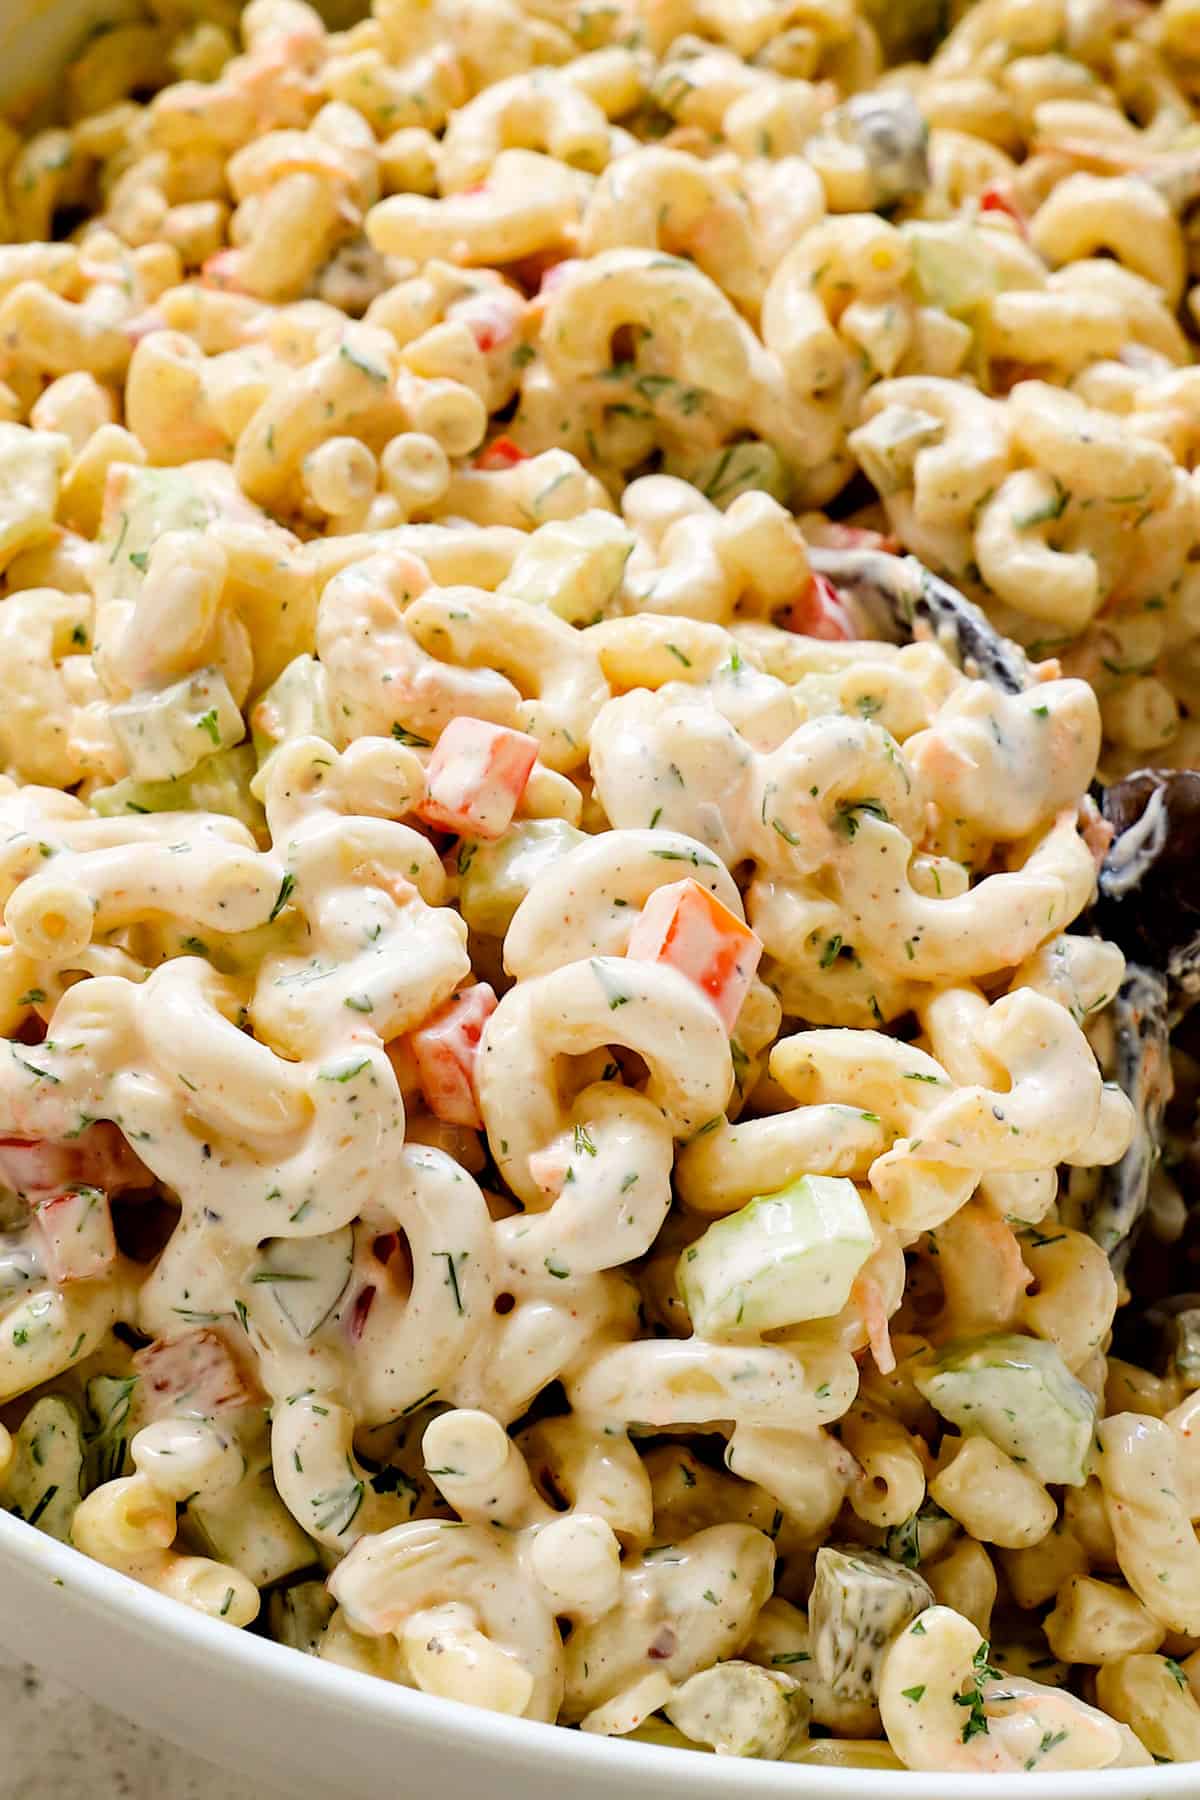 up close of scooping up best macaroni salad recipe showing how creamy it is